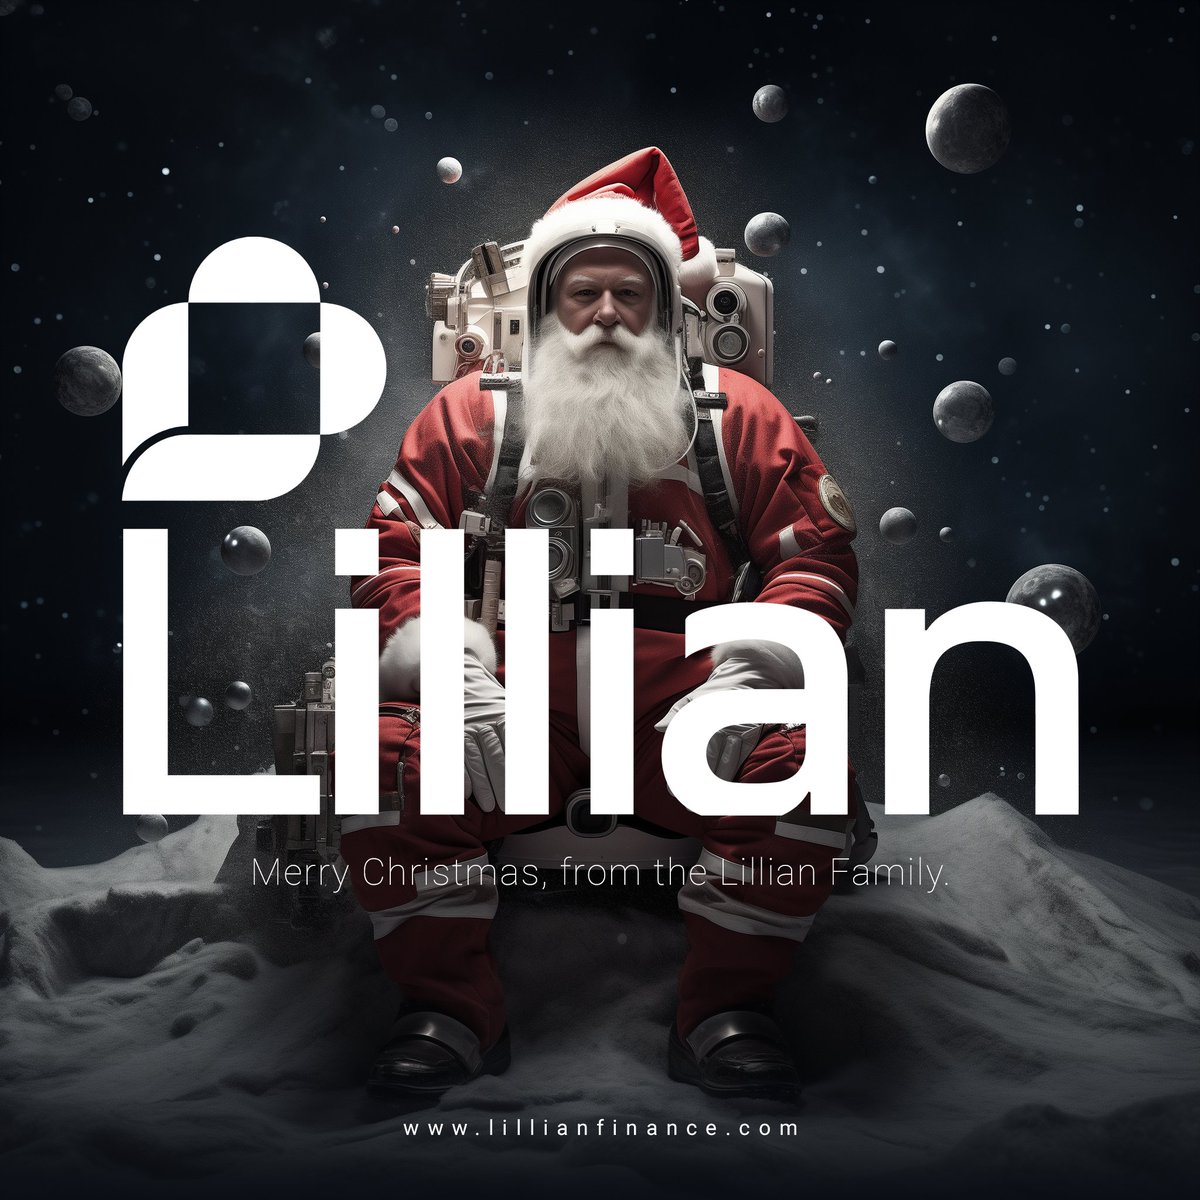 Merry #Christmas! We hope you enjoy this time with your loved ones and have a wonderful winter season. The #Lillian Family.